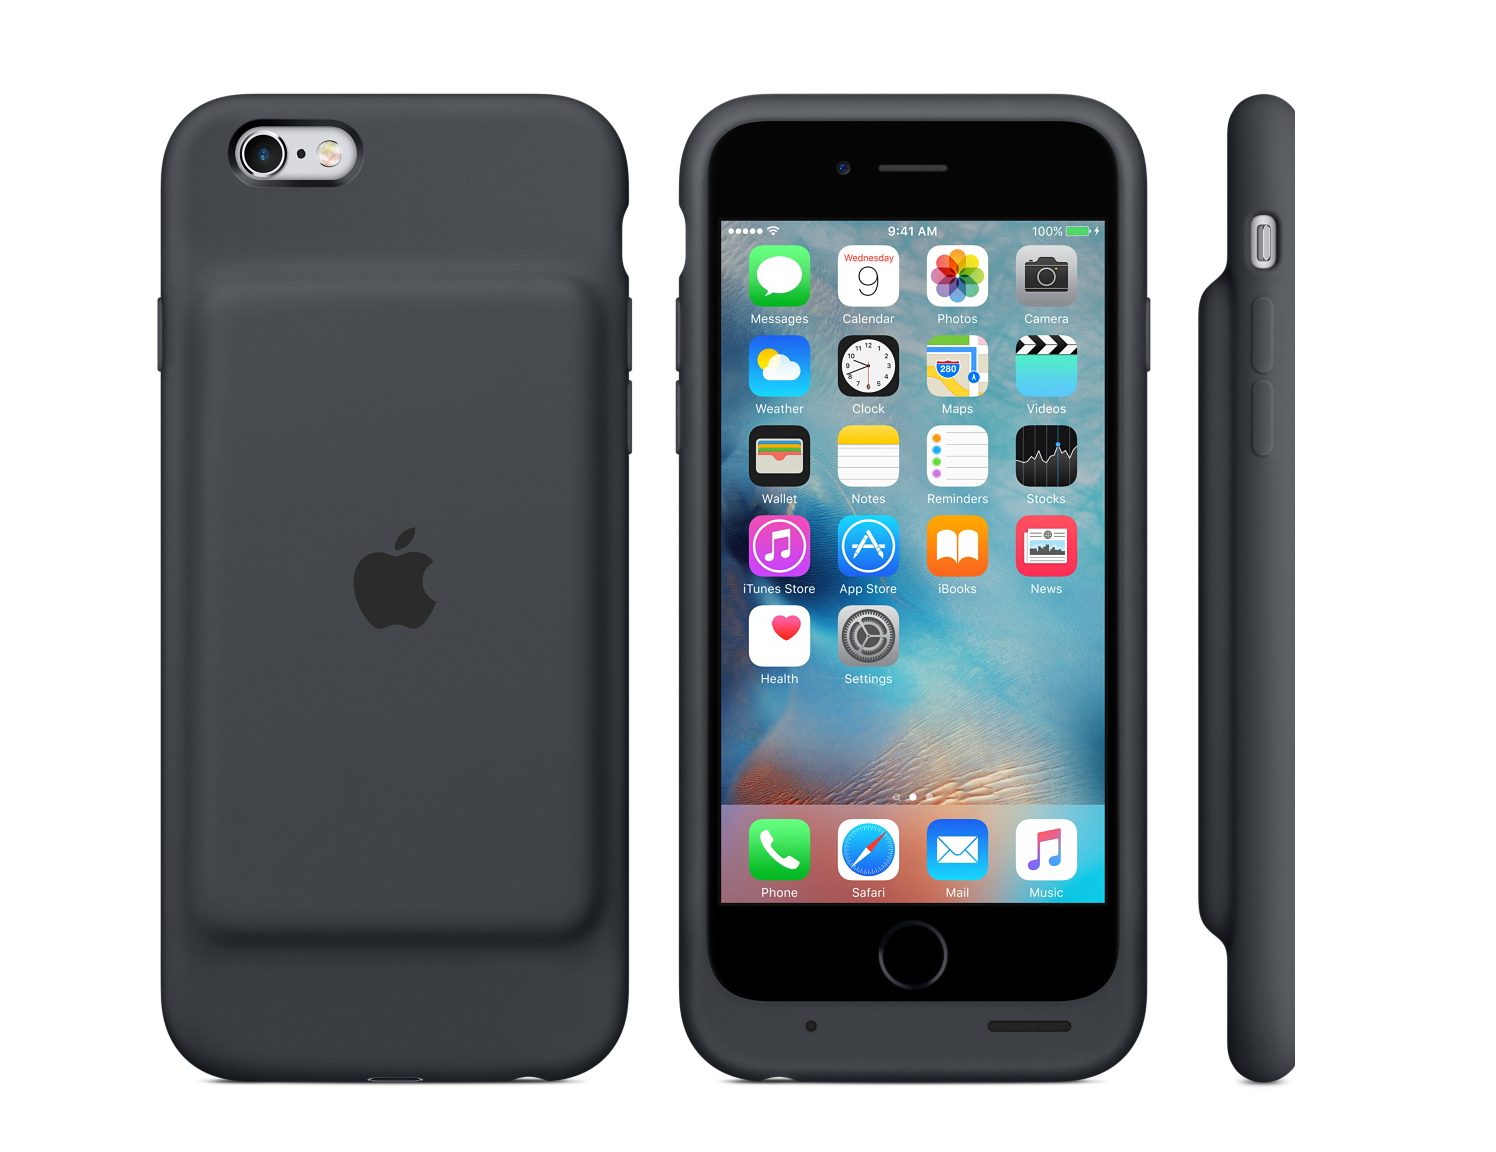 apple solves iphone battery woes with new smart battery case image 2